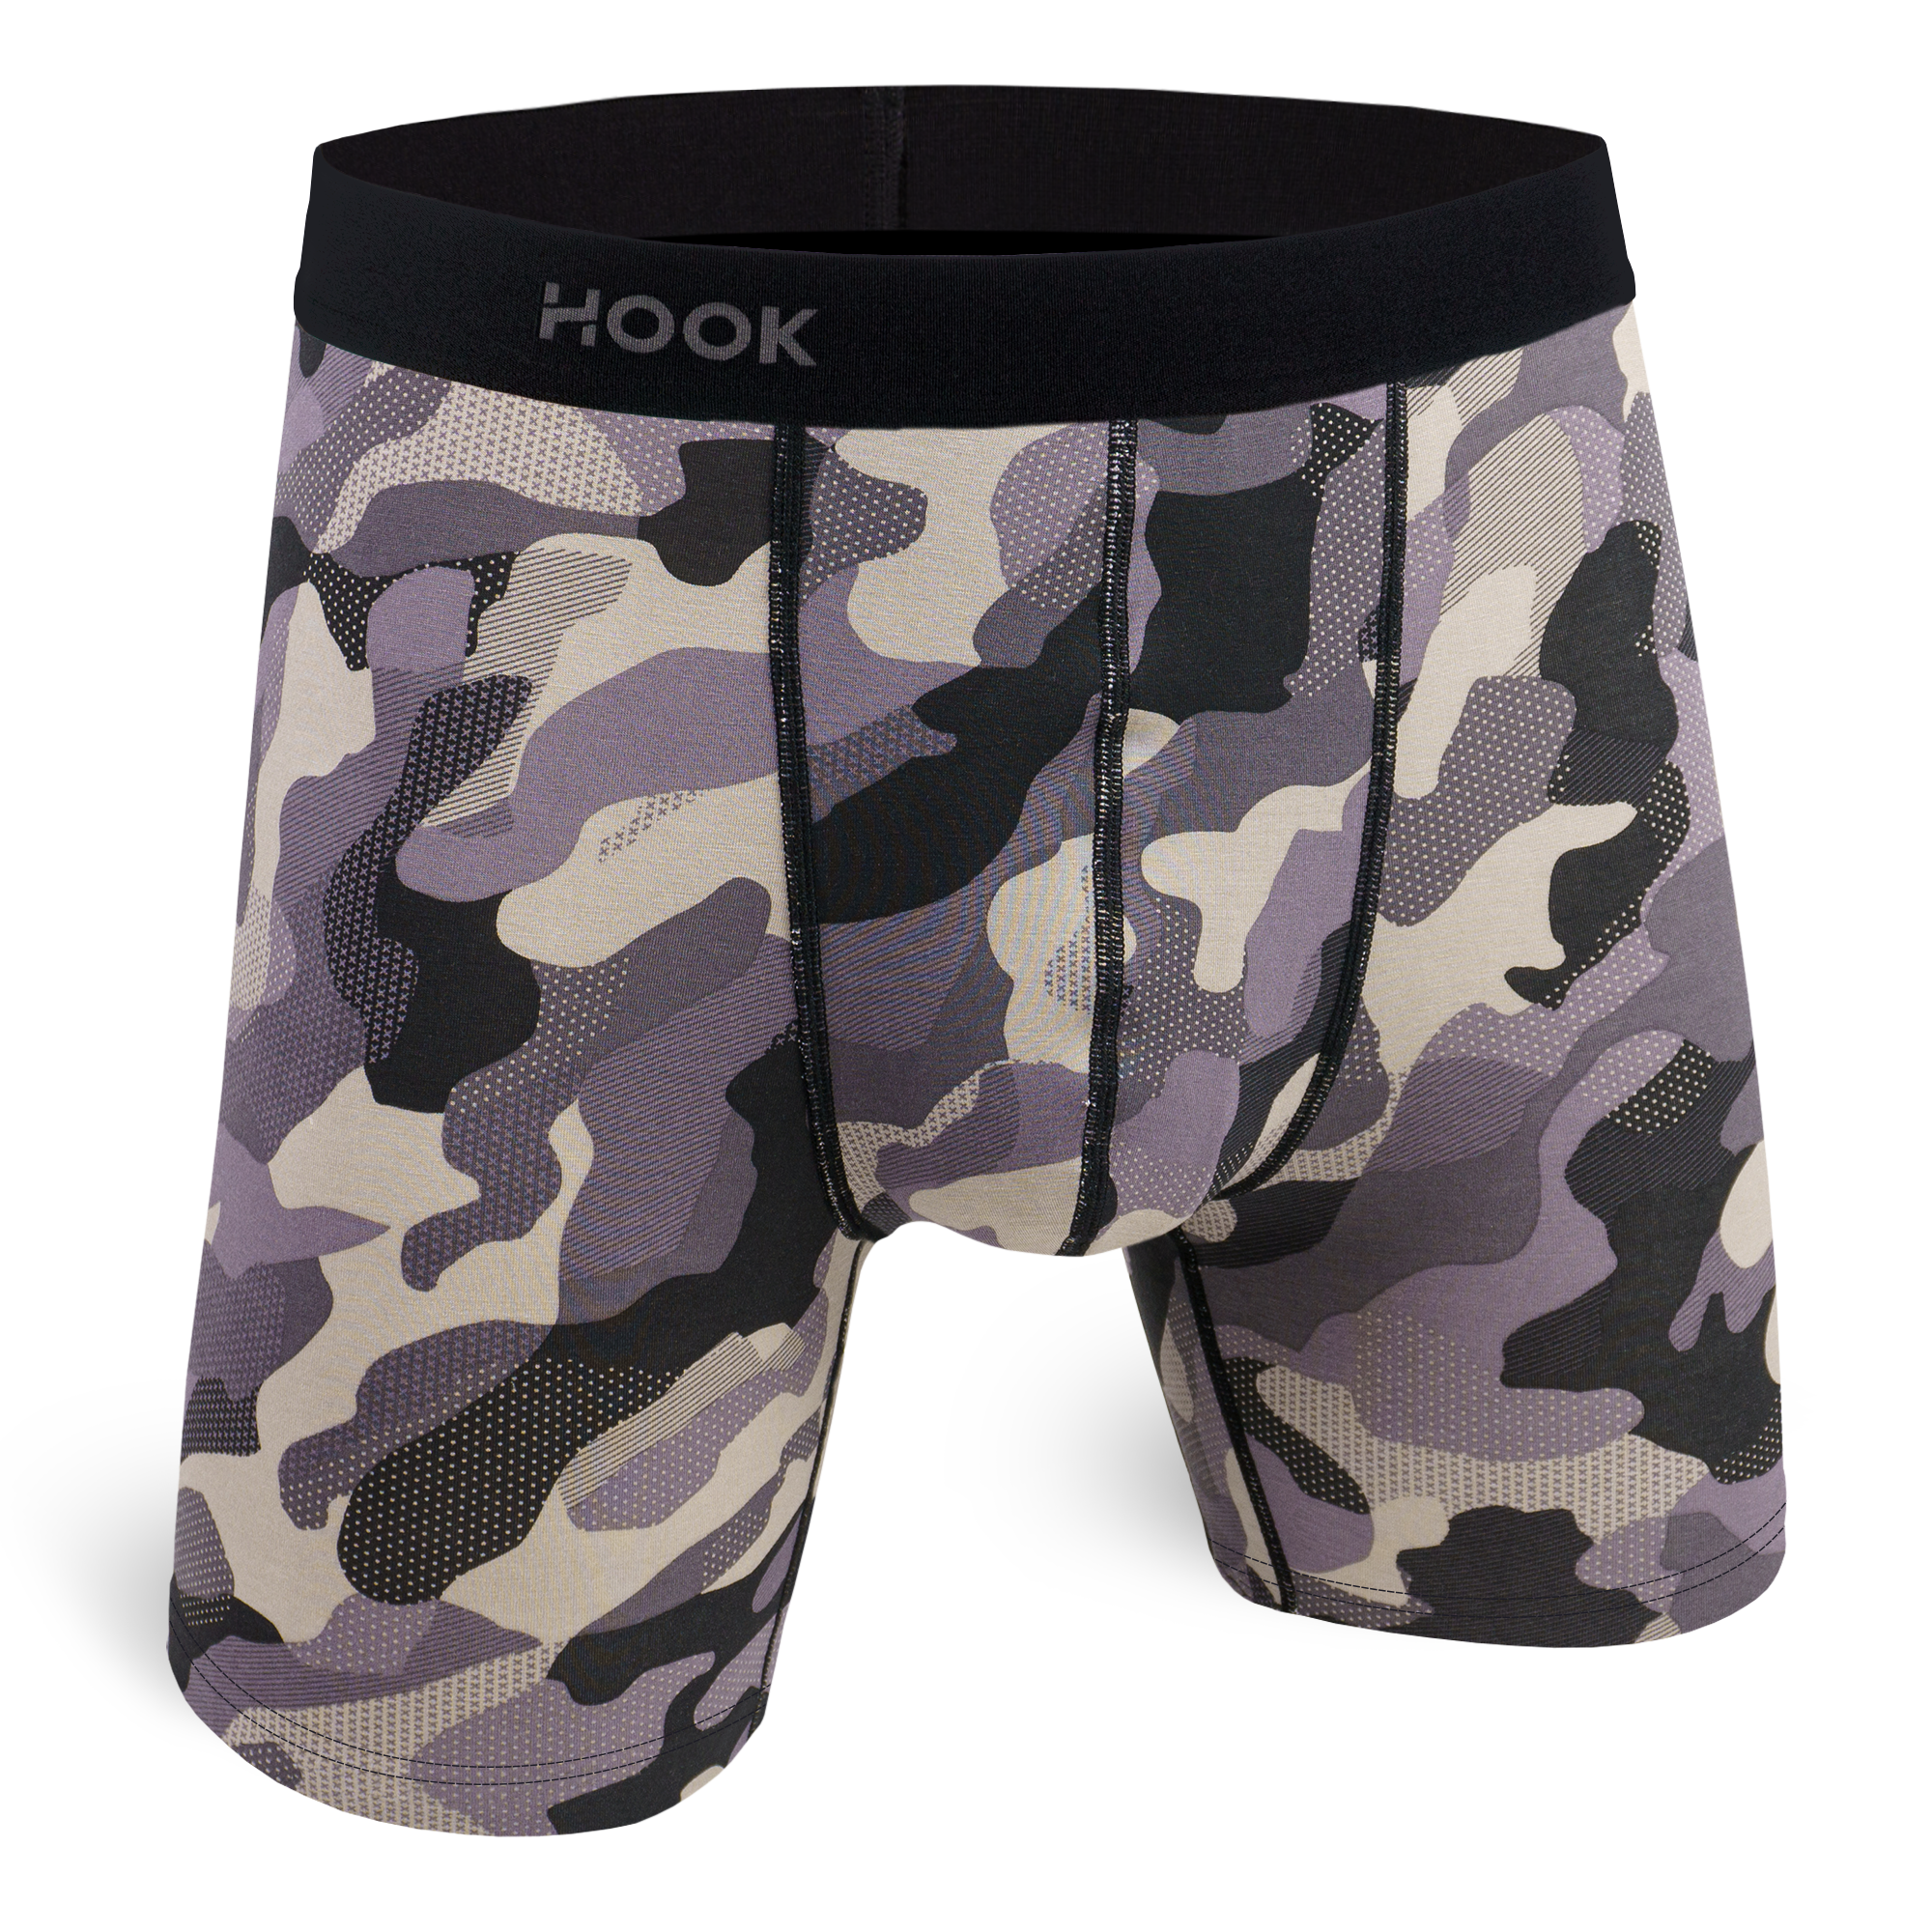 Feel Camo Boxer Briefs with Pouch Support